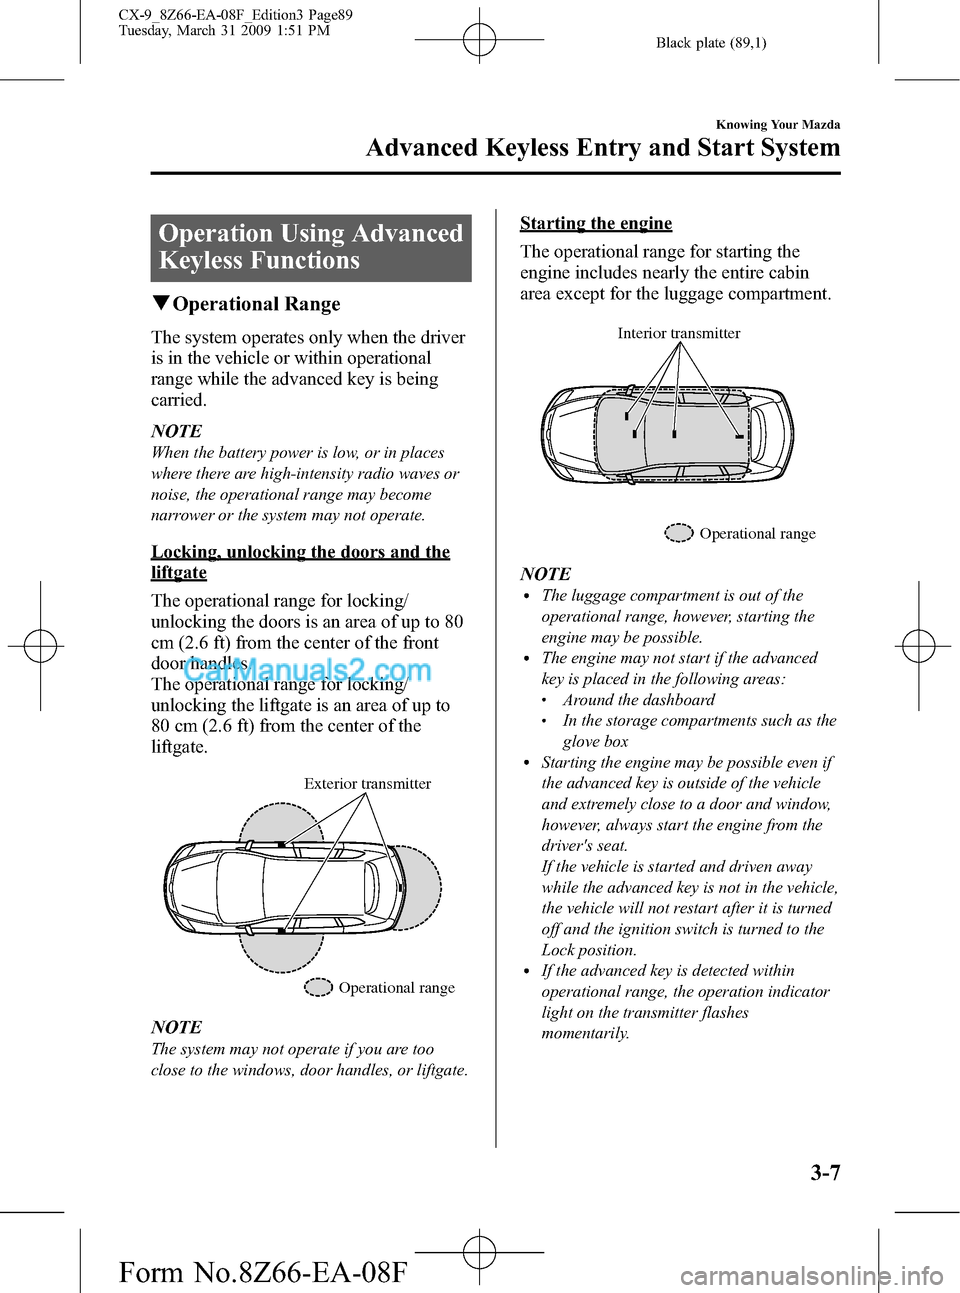 MAZDA MODEL CX-9 2009  Owners Manual (in English) Black plate (89,1)
Operation Using Advanced
Keyless Functions
qOperational Range
The system operates only when the driver
is in the vehicle or within operational
range while the advanced key is being
